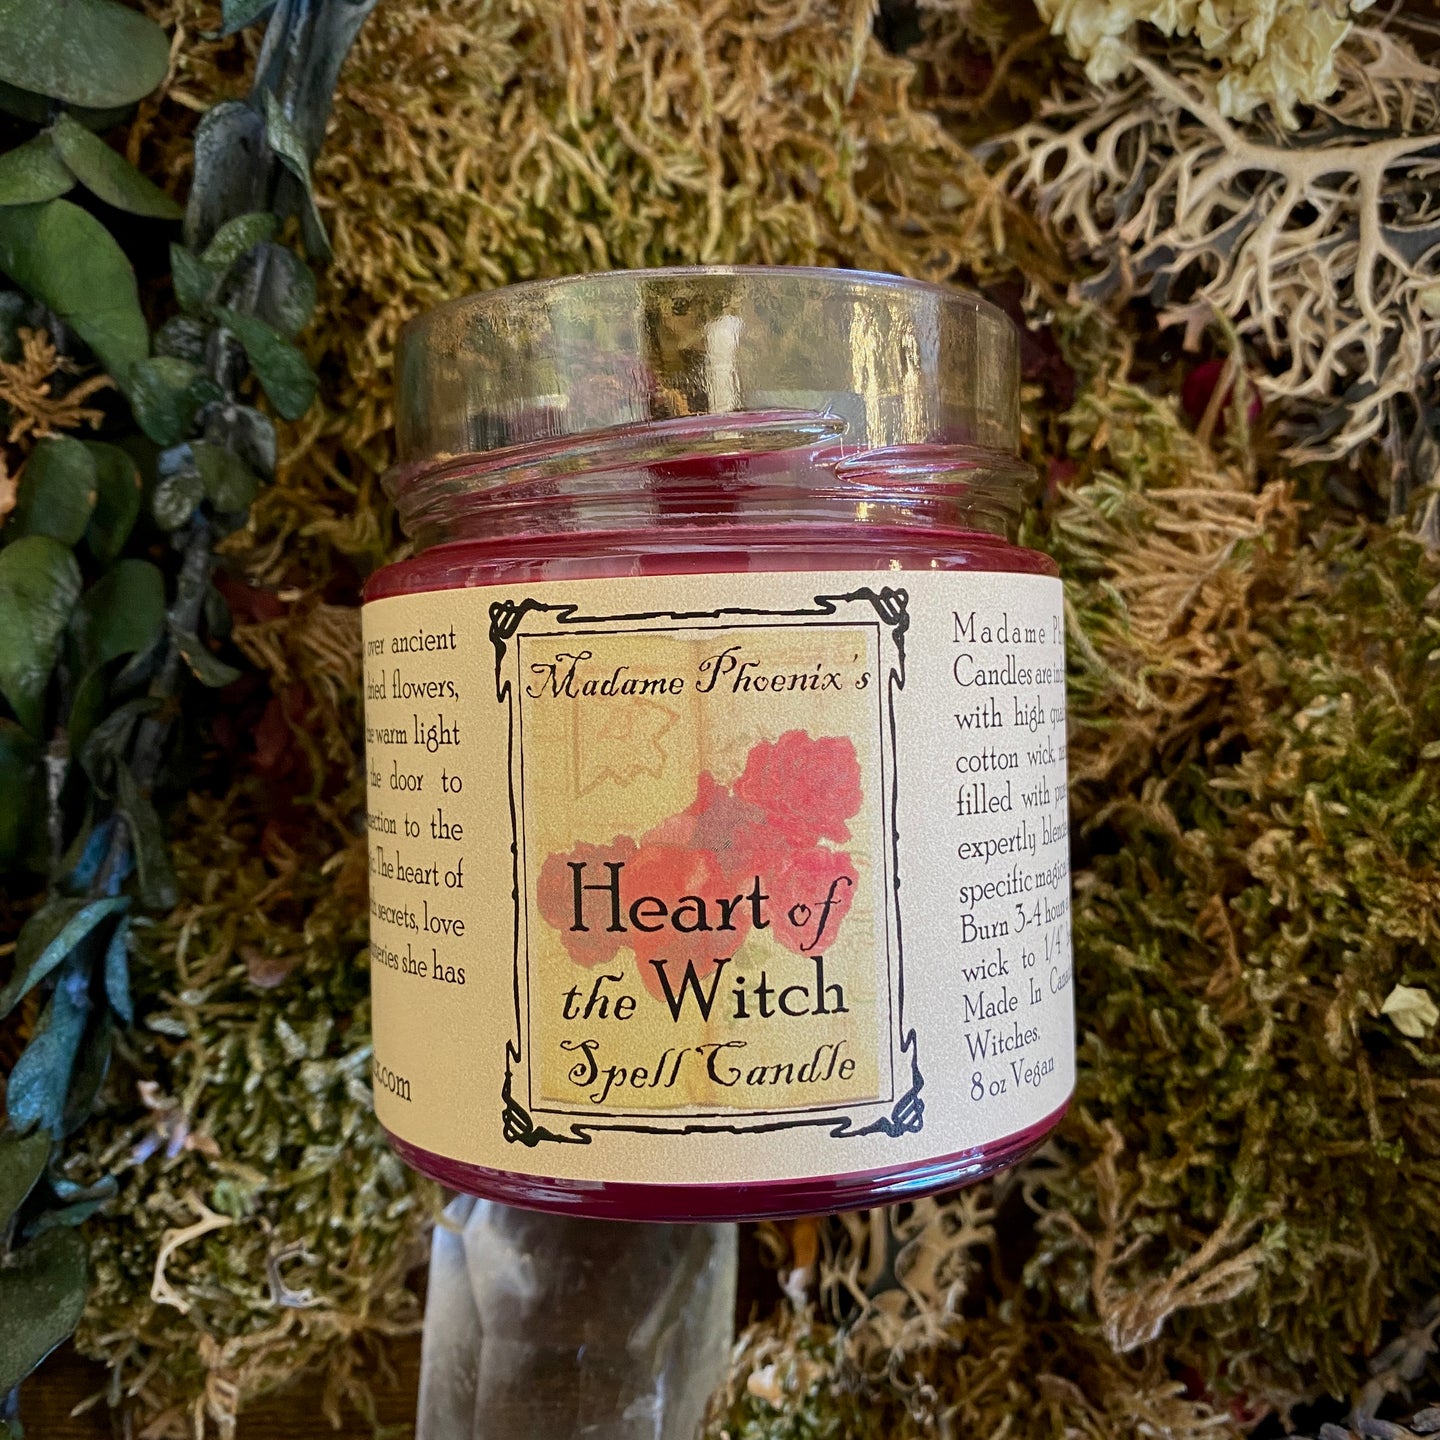 Heart of the Witch Ritual Spell Candle